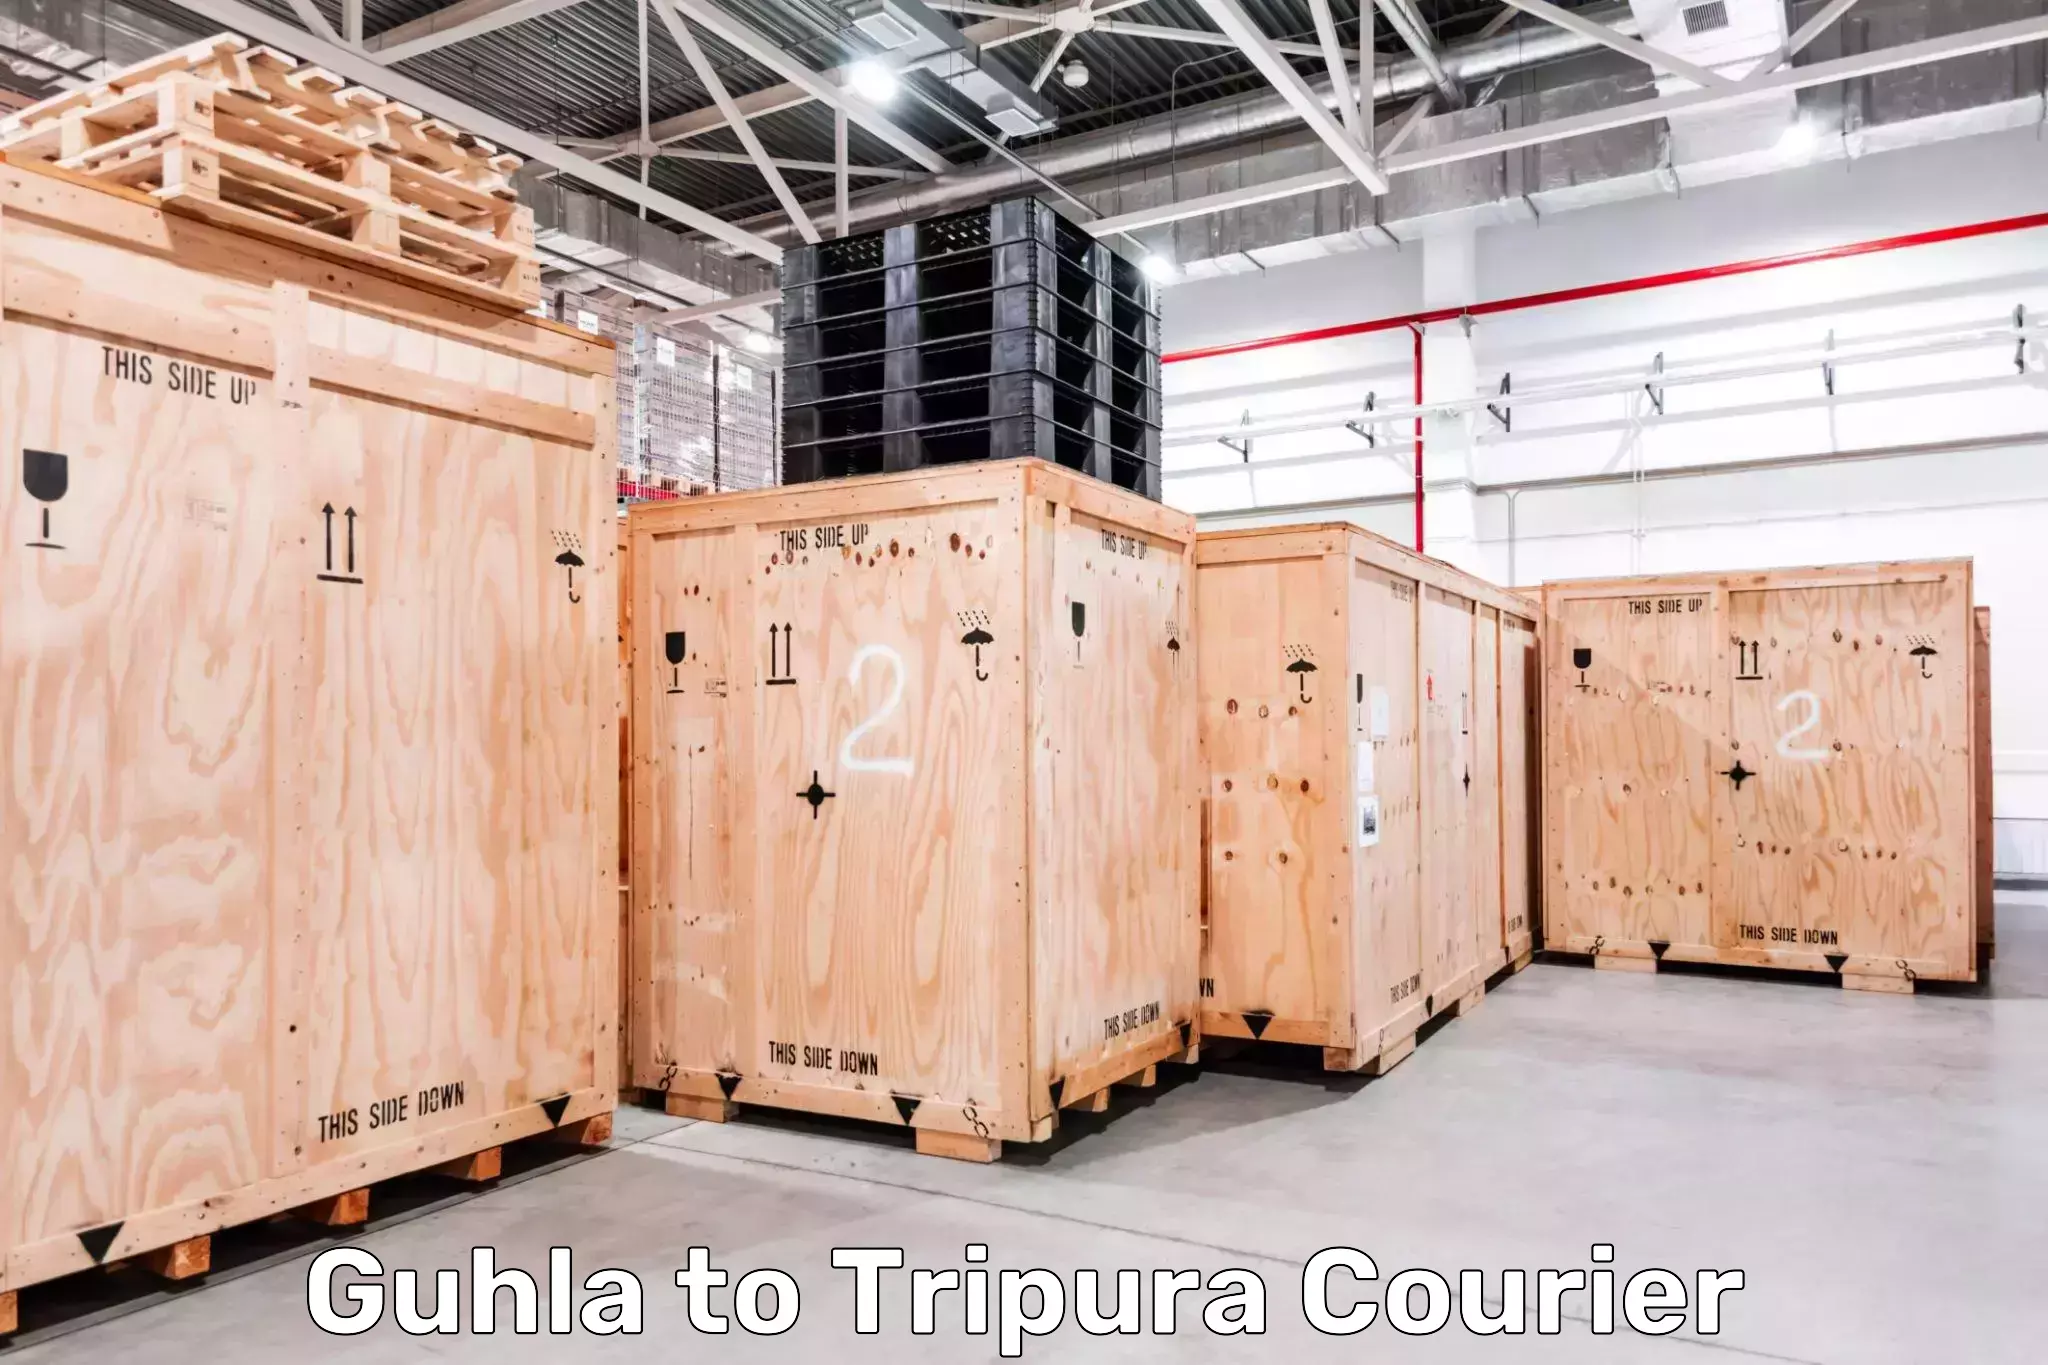 Flexible delivery schedules Guhla to Tripura